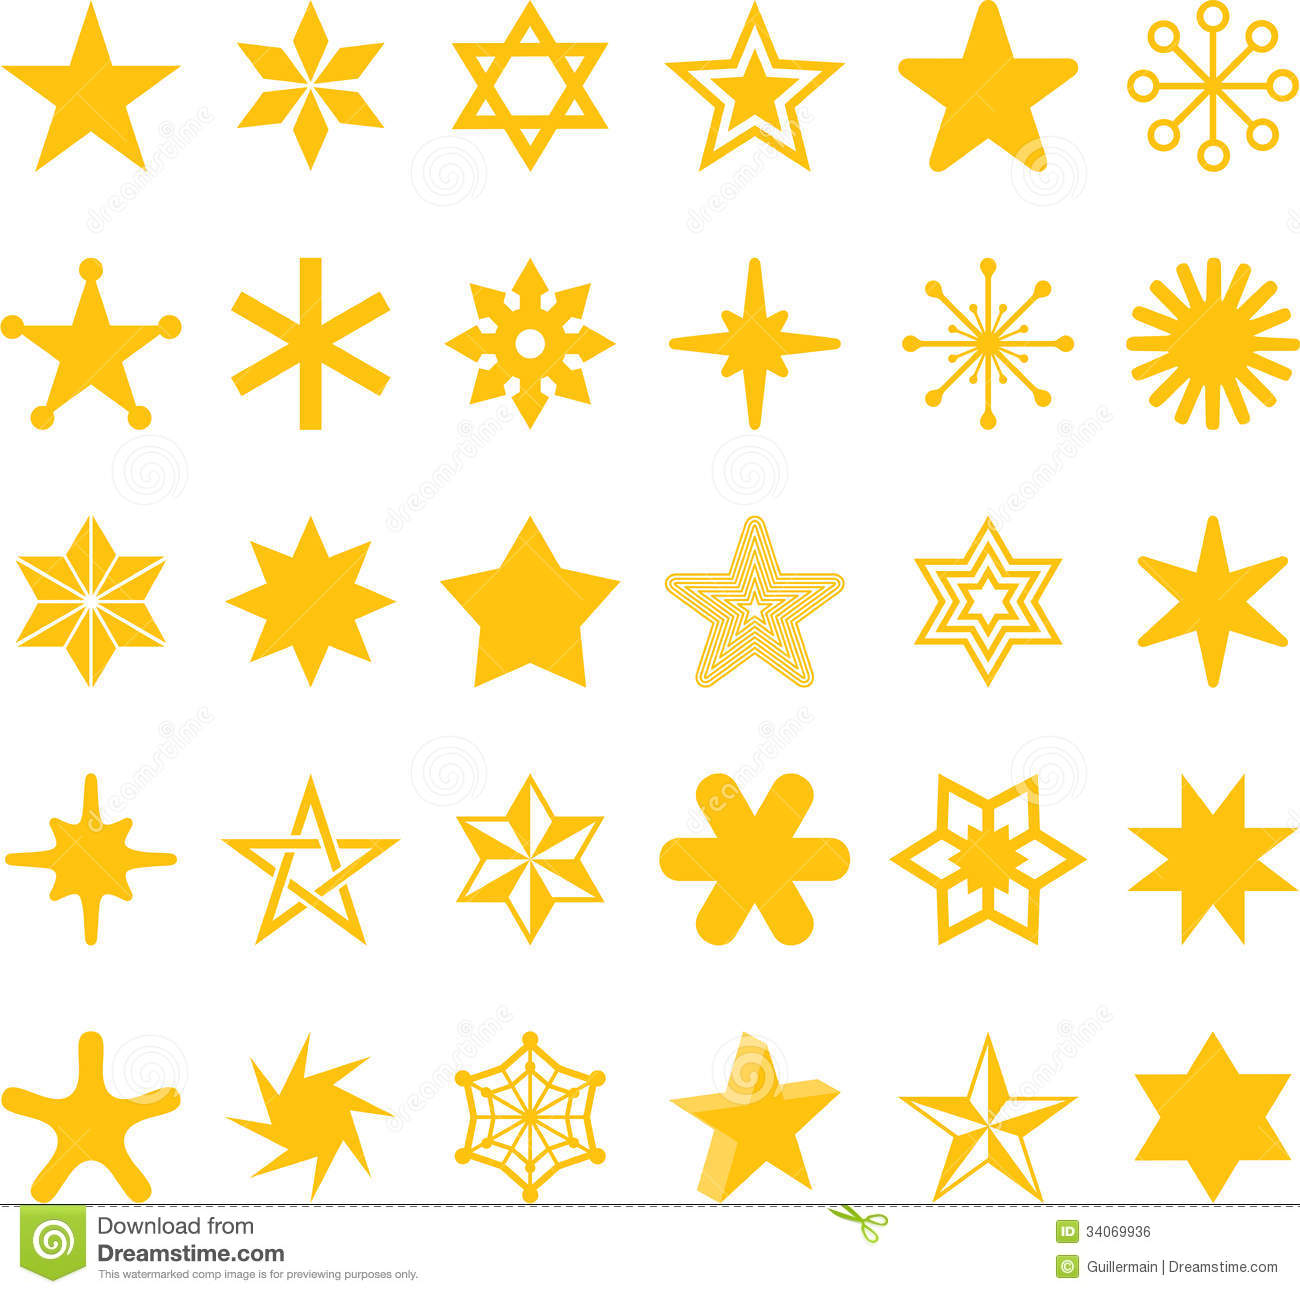 Different Star Shapes